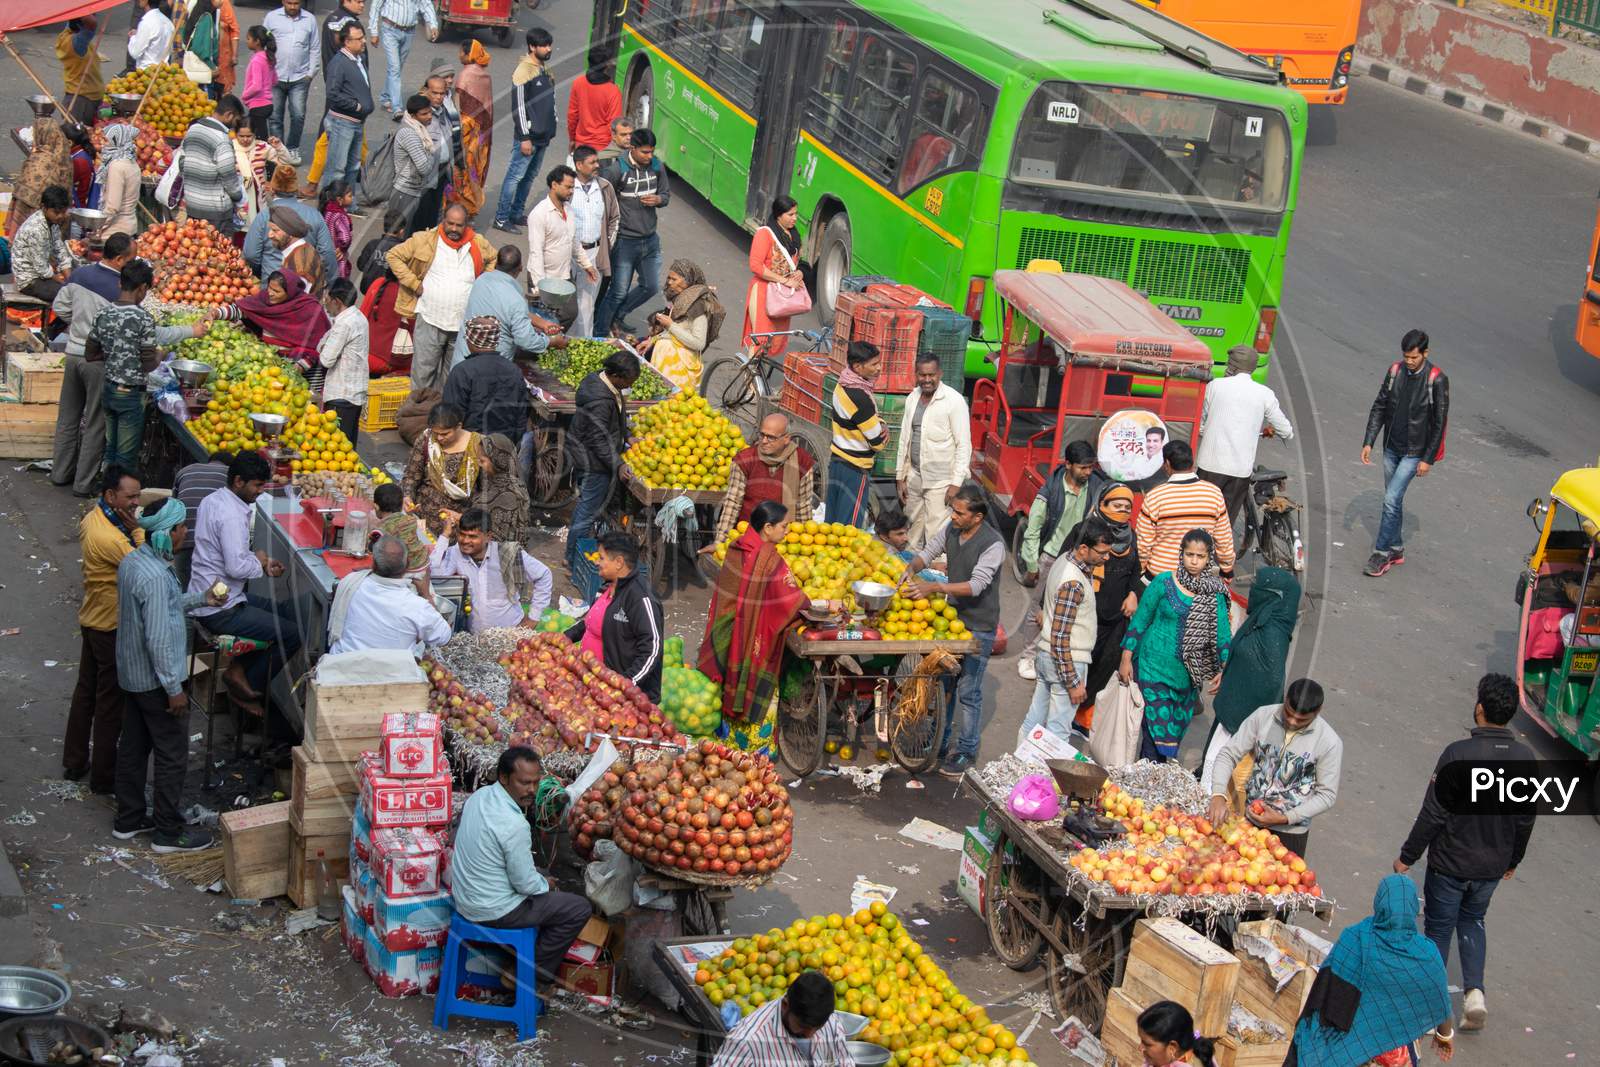 Fruit sellers selling fruits on their stalls or thelas